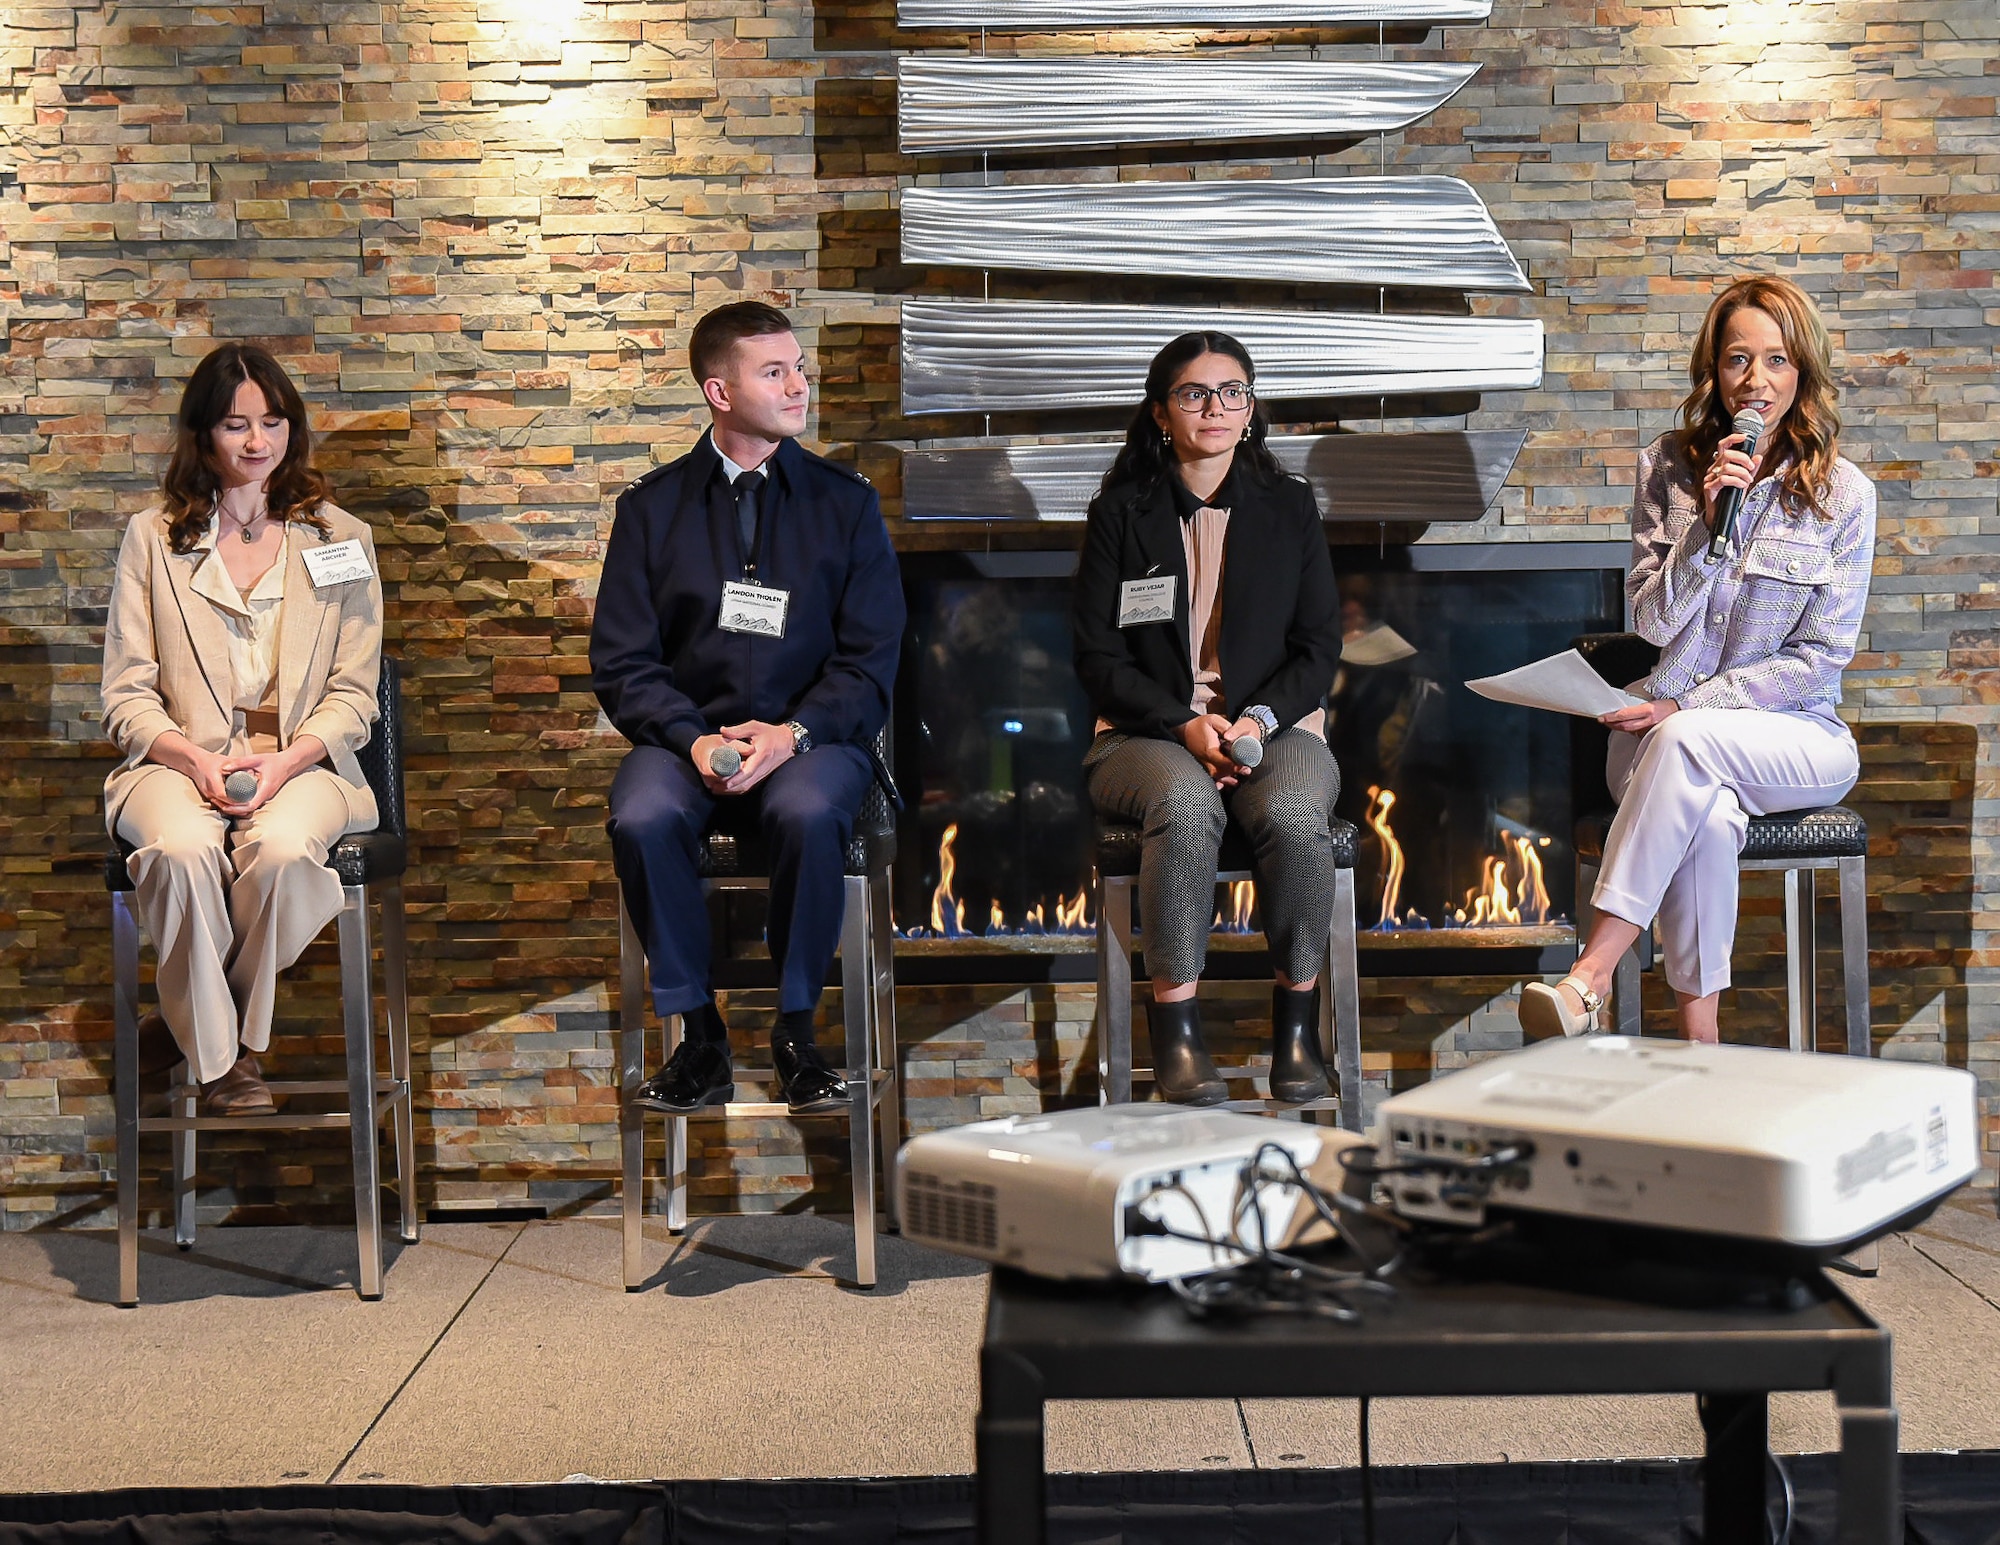 Leading the symposium's first panel, Cox was joined by Capt. Landon Tholen, Samantha Archer, and Ruby Vejar, who brought diverse perspectives to the table, illuminating the motivations propelling the youth's dedication to service and volunteerism.